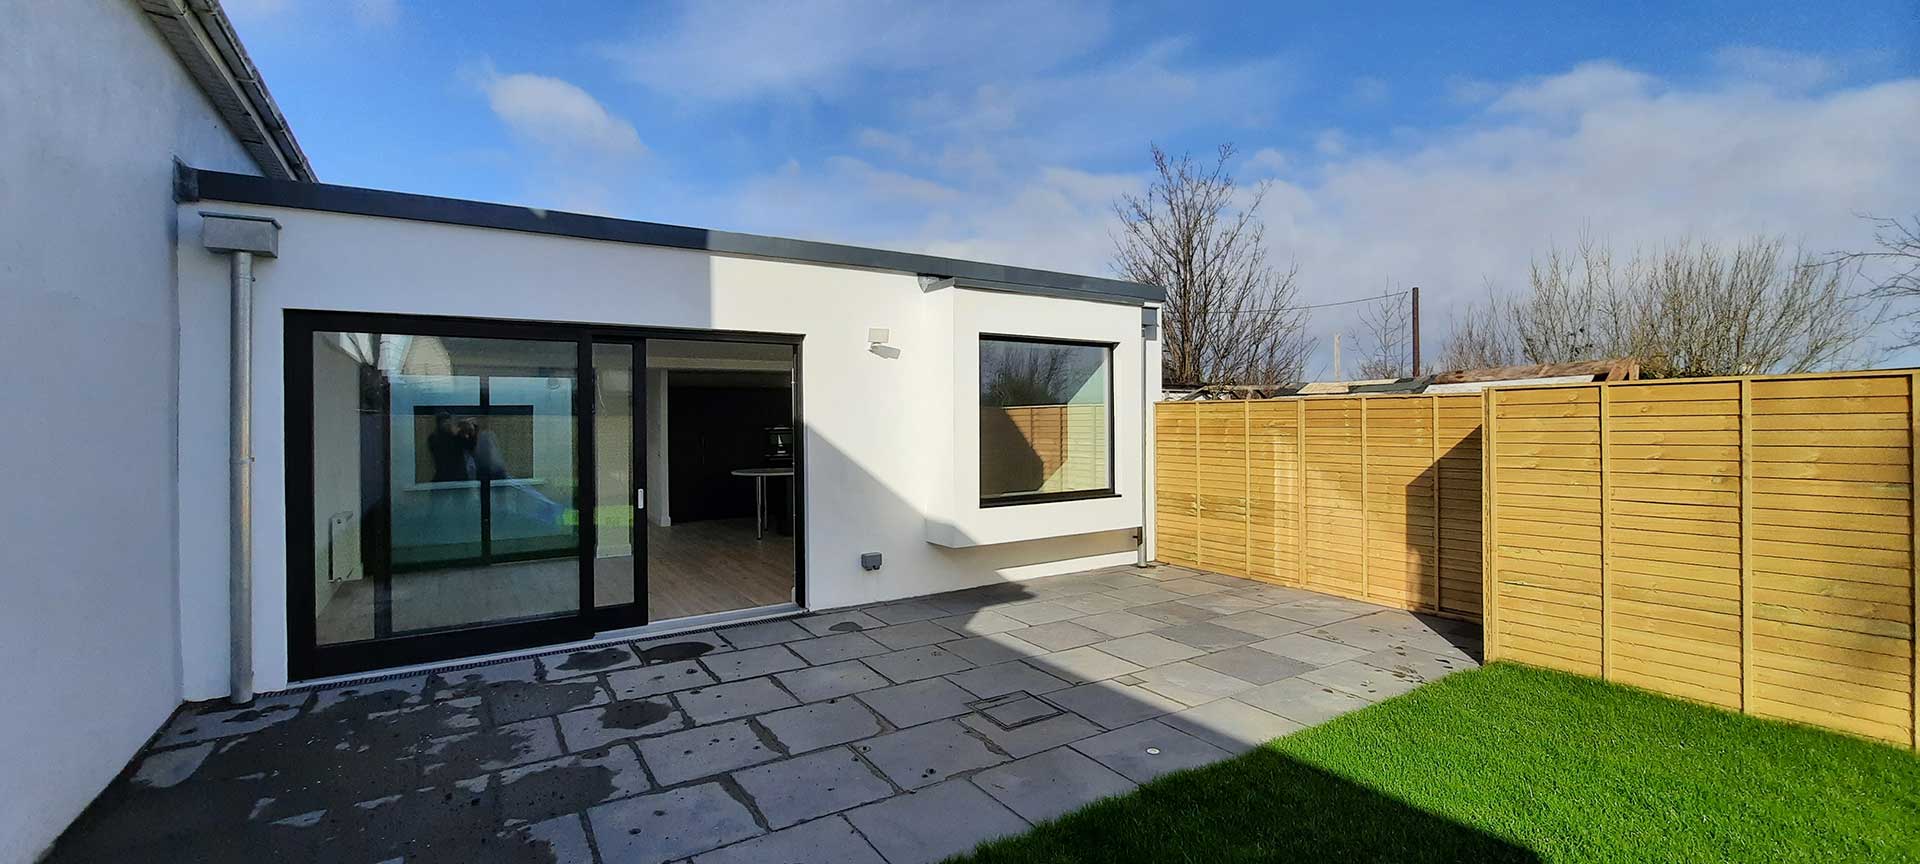 Renovation and Extension of Private House in Blackrock, Dublin